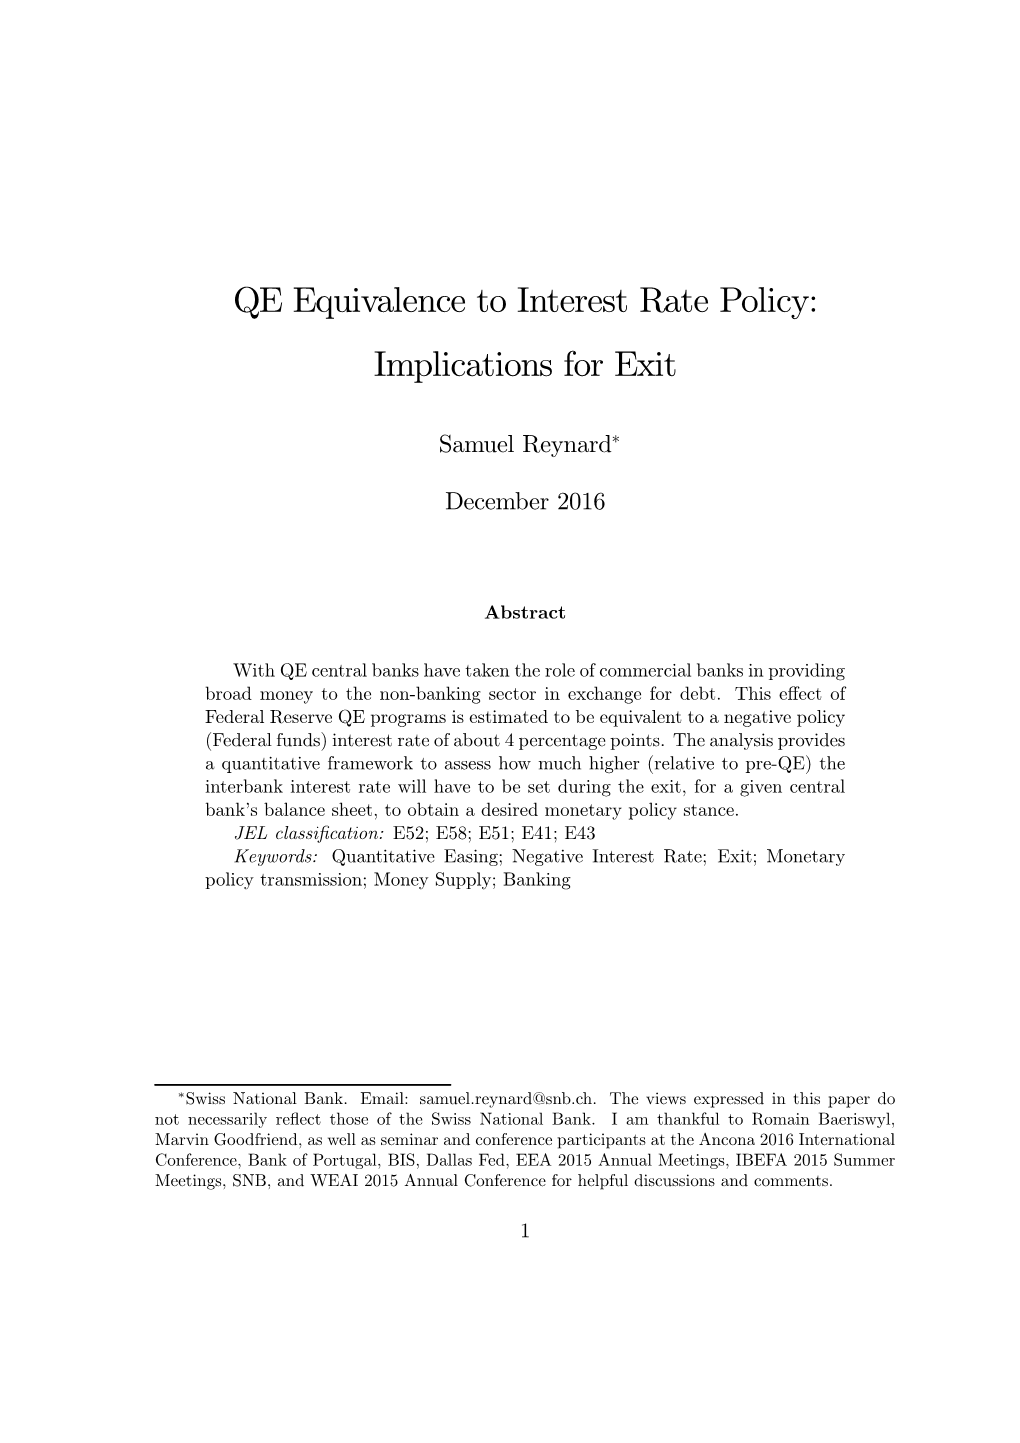 QE Equivalence to Interest Rate Policy: Implications for Exit